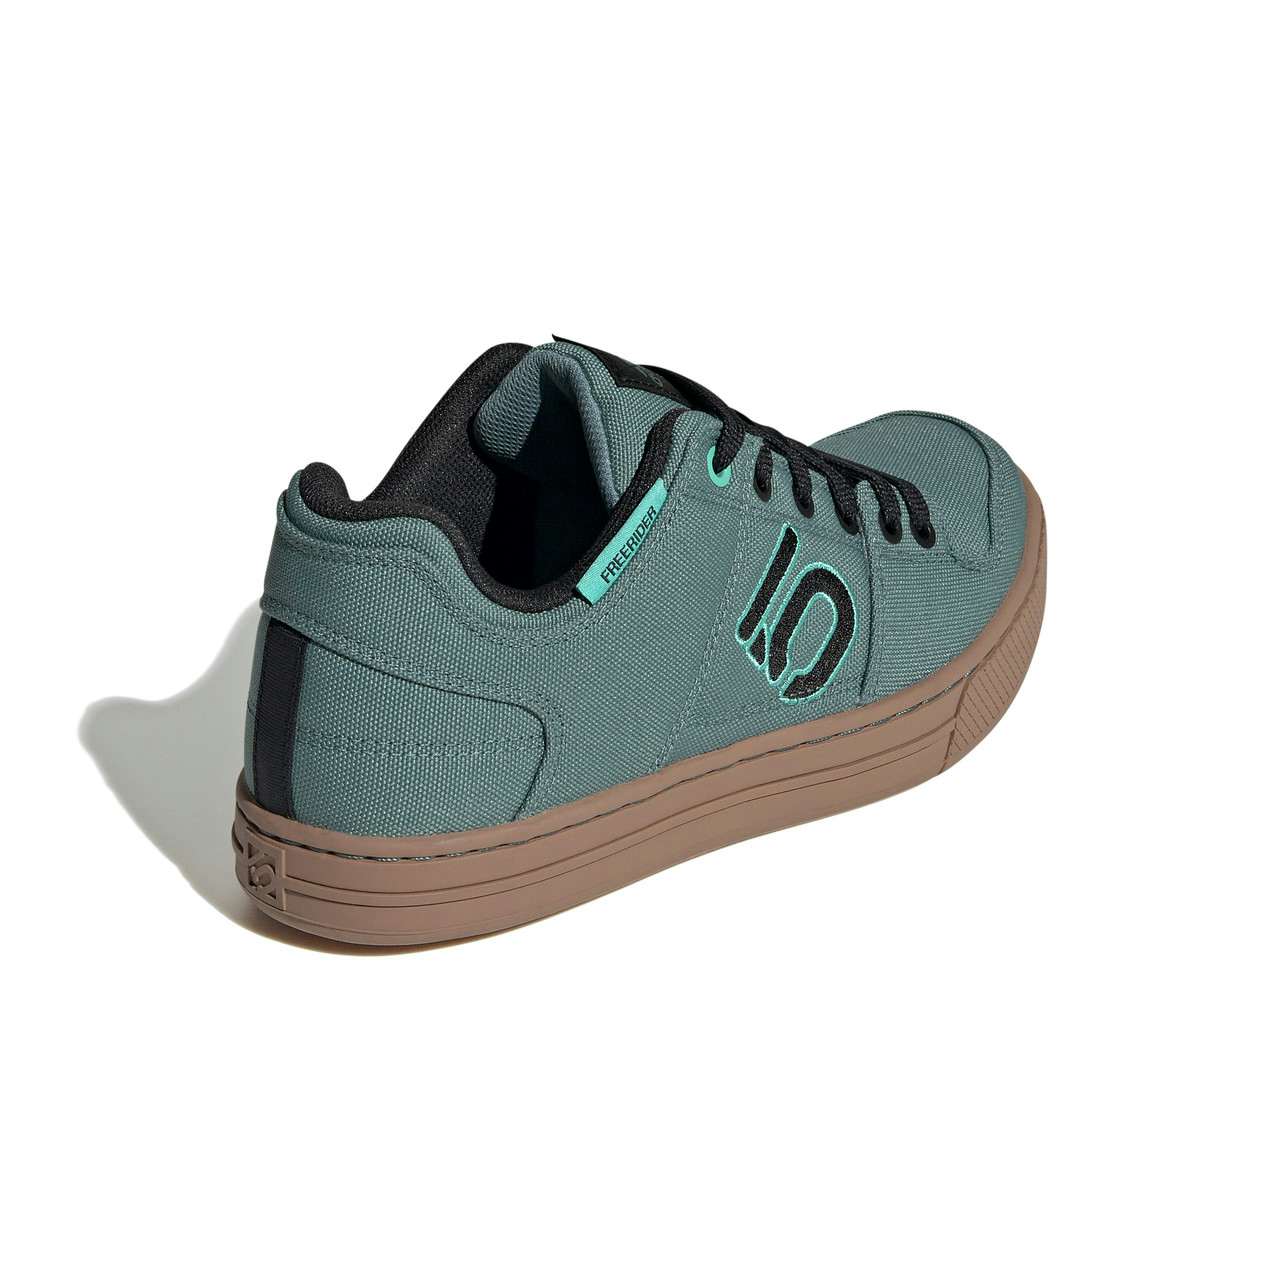 Freerider Canvas Cycling Shoes Hazy Emerald/Core Black/A